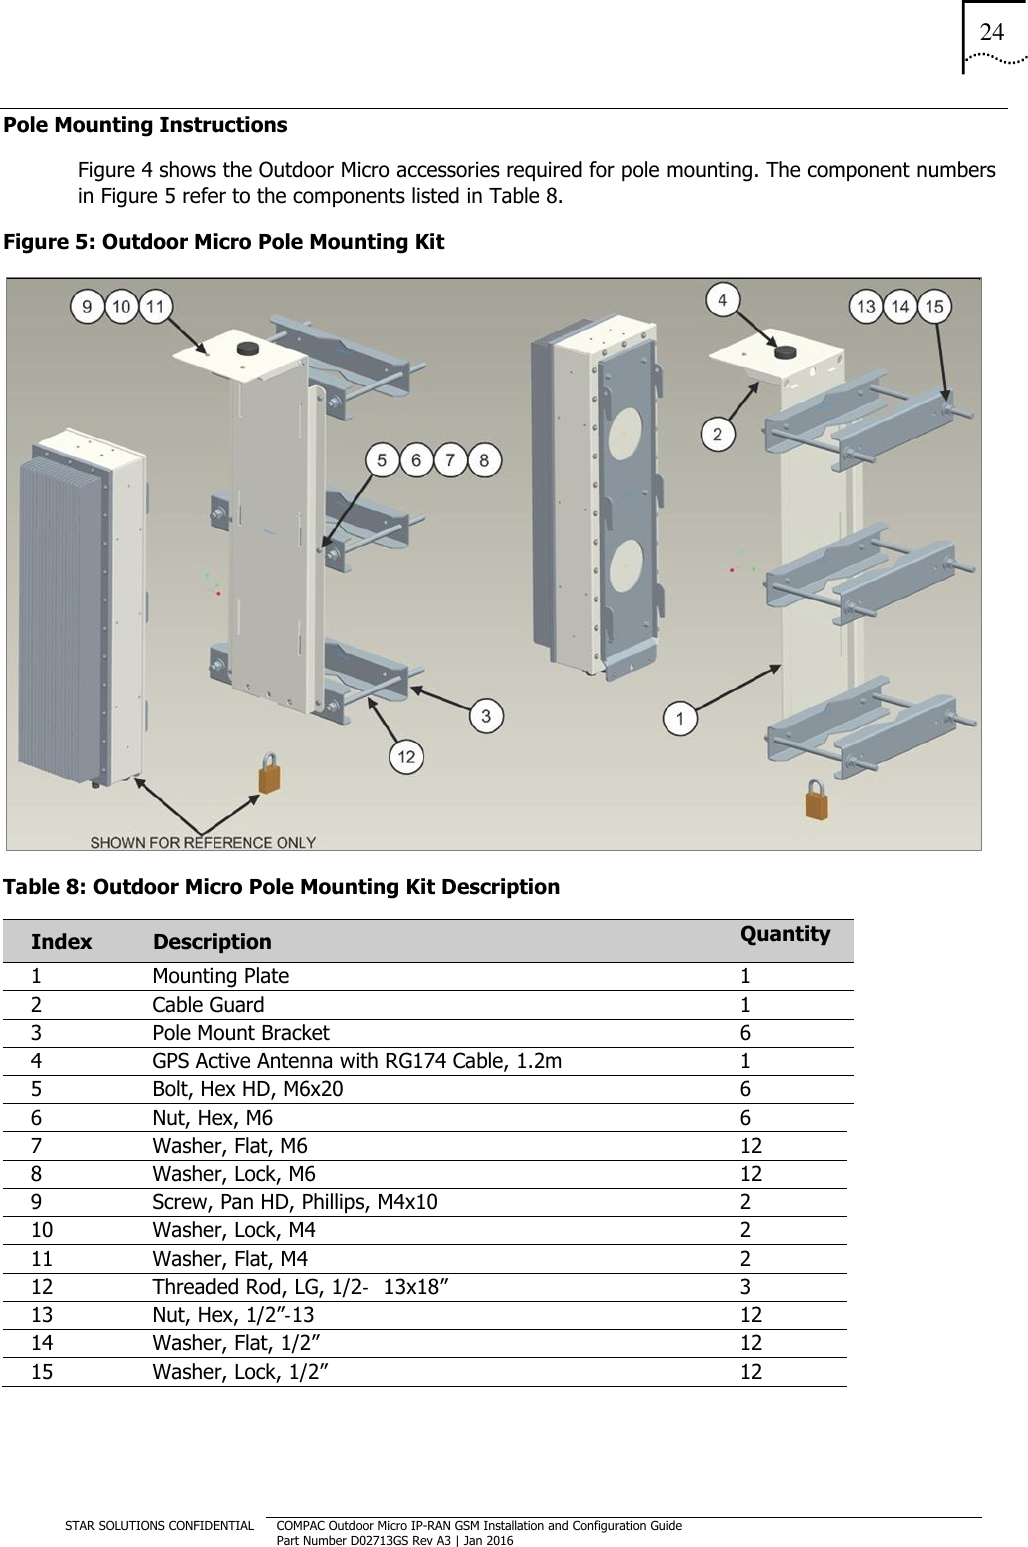 24  STAR SOLUTIONS CONFIDENTIAL COMPAC Outdoor Micro IP-RAN GSM Installation and Configuration Guide Part Number D02713GS Rev A3 | Jan 2016  Pole Mounting Instructions Figure 4 shows the Outdoor Micro accessories required for pole mounting. The component numbers in Figure 5 refer to the components listed in Table 8. Figure 5: Outdoor Micro Pole Mounting Kit  Table 8: Outdoor Micro Pole Mounting Kit Description Index Description   Quantity 1 Mounting Plate   1 2   Cable Guard     1 3 Pole Mount Bracket   6 4 GPS Active Antenna with RG174 Cable, 1.2m   1 5 Bolt, Hex HD, M6x20   6 6 Nut, Hex, M6   6 7 Washer, Flat, M6   12 8 Washer, Lock, M6   12 9 Screw, Pan HD, Phillips, M4x10   2 10 Washer, Lock, M4   2 11 Washer, Flat, M4   2 12 Threaded Rod, LG, 1/2‐13x18”   3 13 Nut, Hex, 1/2”‐13   12 14 Washer, Flat, 1/2”   12 15 Washer, Lock, 1/2”   12 